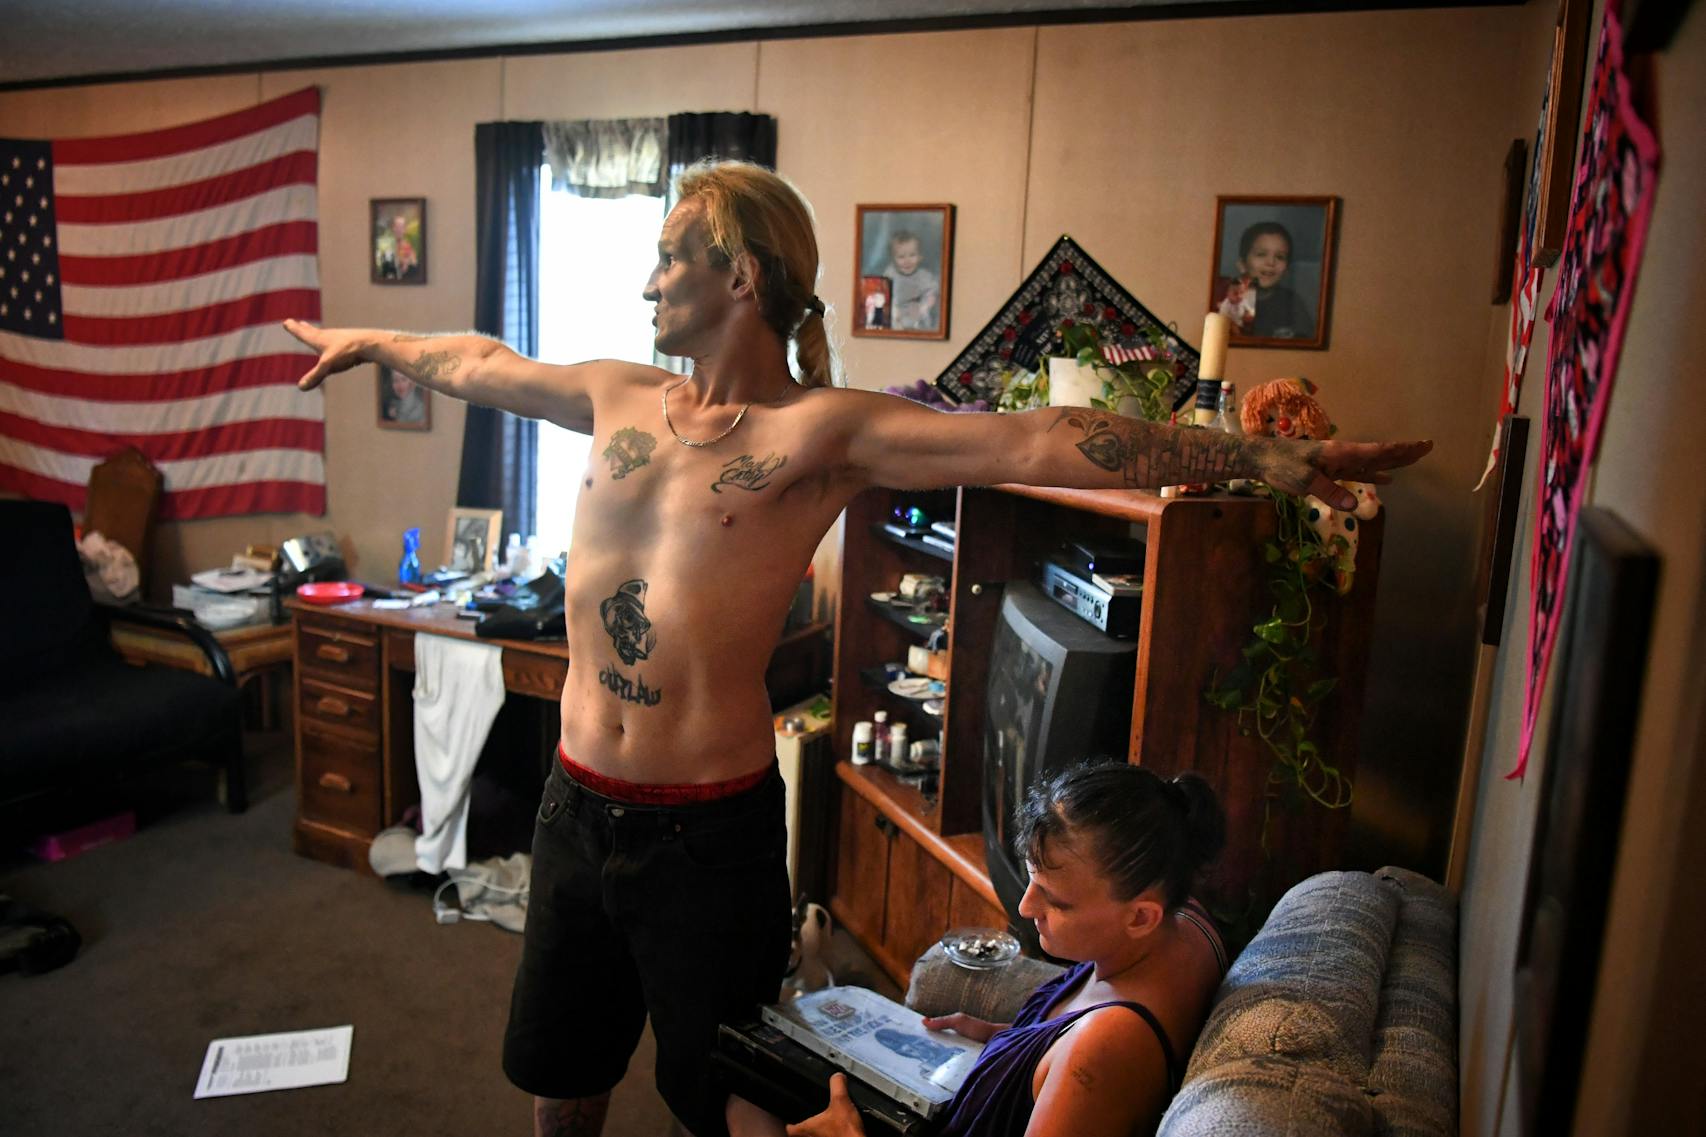 Mark Fenning demonstrated how he could just barely reach from one side of his solitary confinement cell to the other. Fenning and his wife, Cathy, were in their mobile home that they rented this summer in Montevideo, Minn.